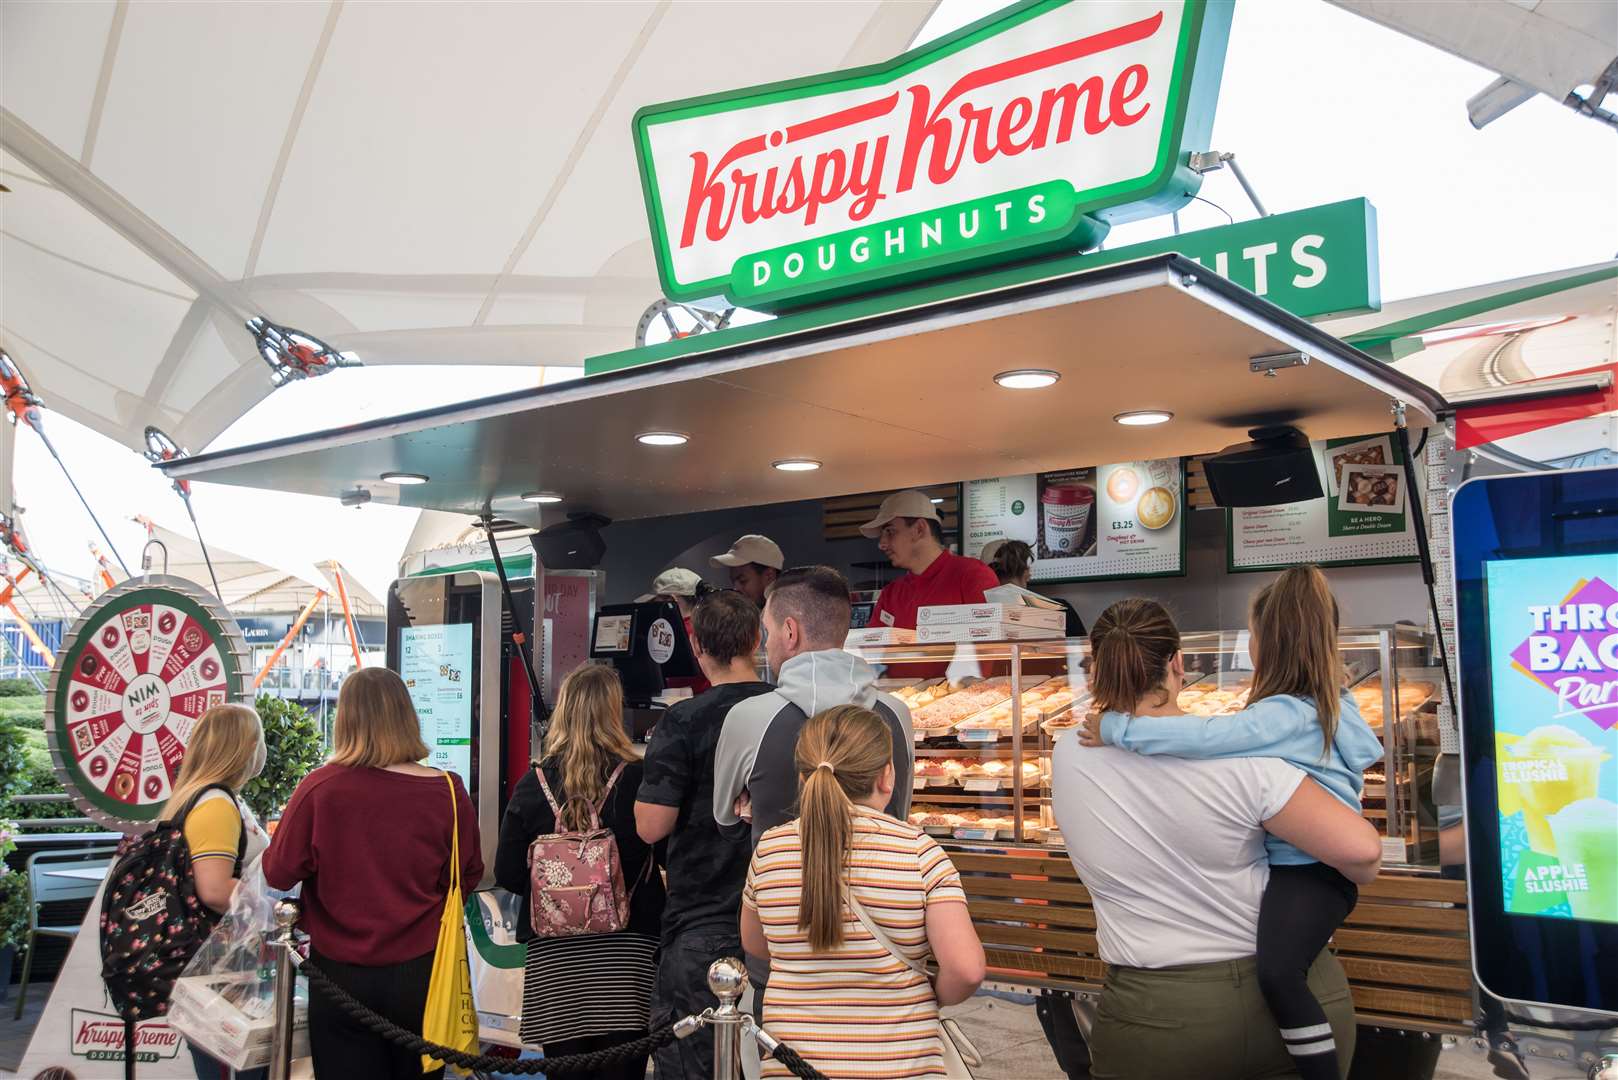 New shop openings - such as that of Krispy Kreme - has seen queues forming to be amongst the first customers